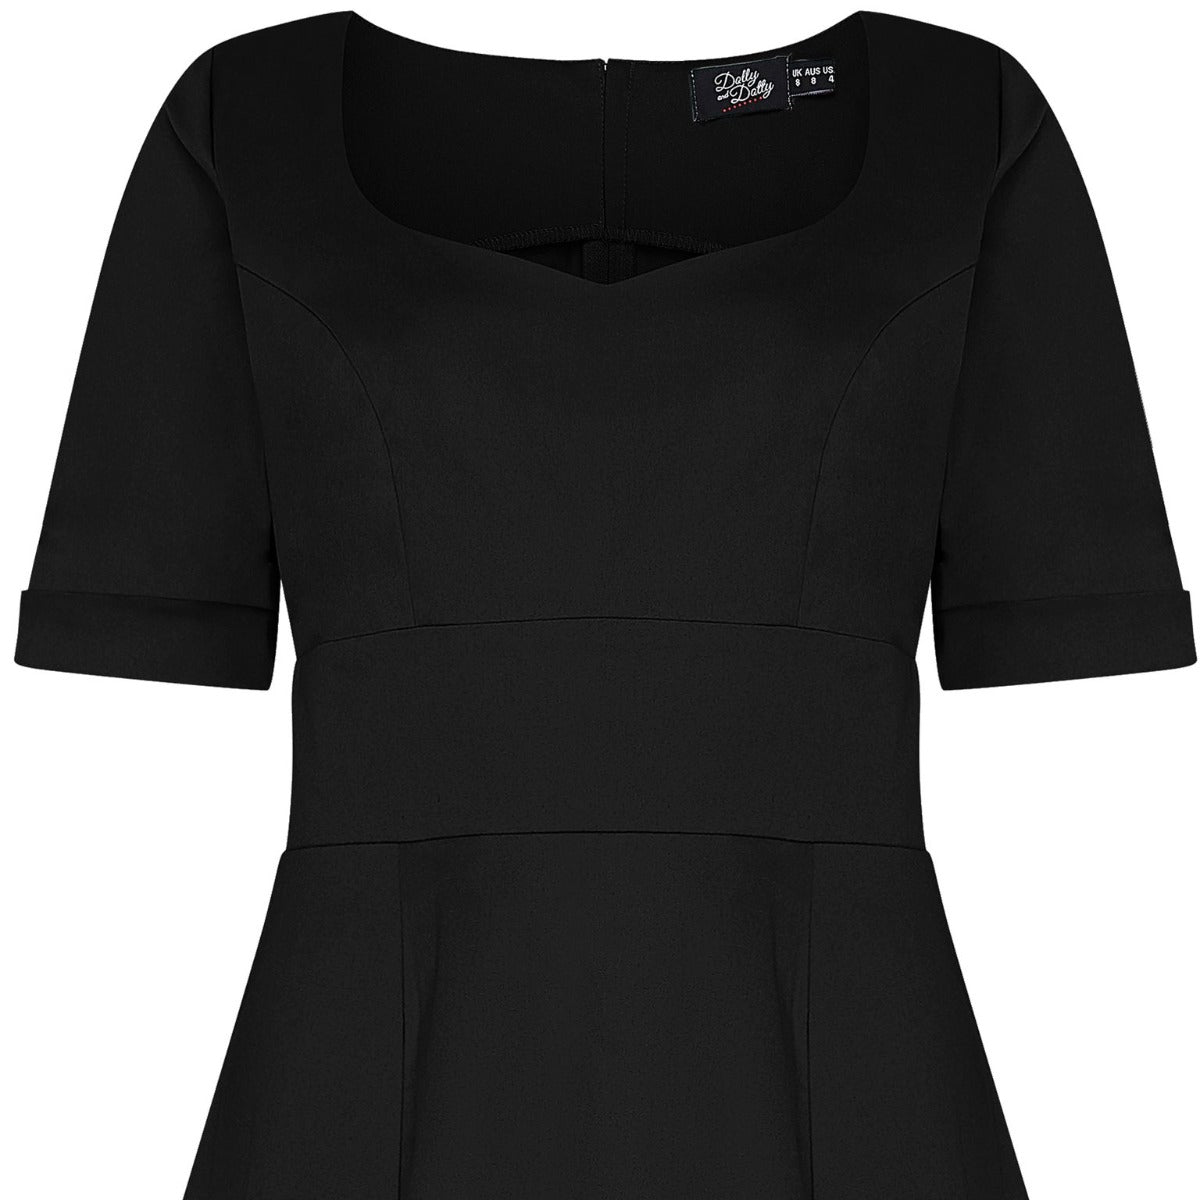 Barbara short sleeved flared dress, in black, close up view